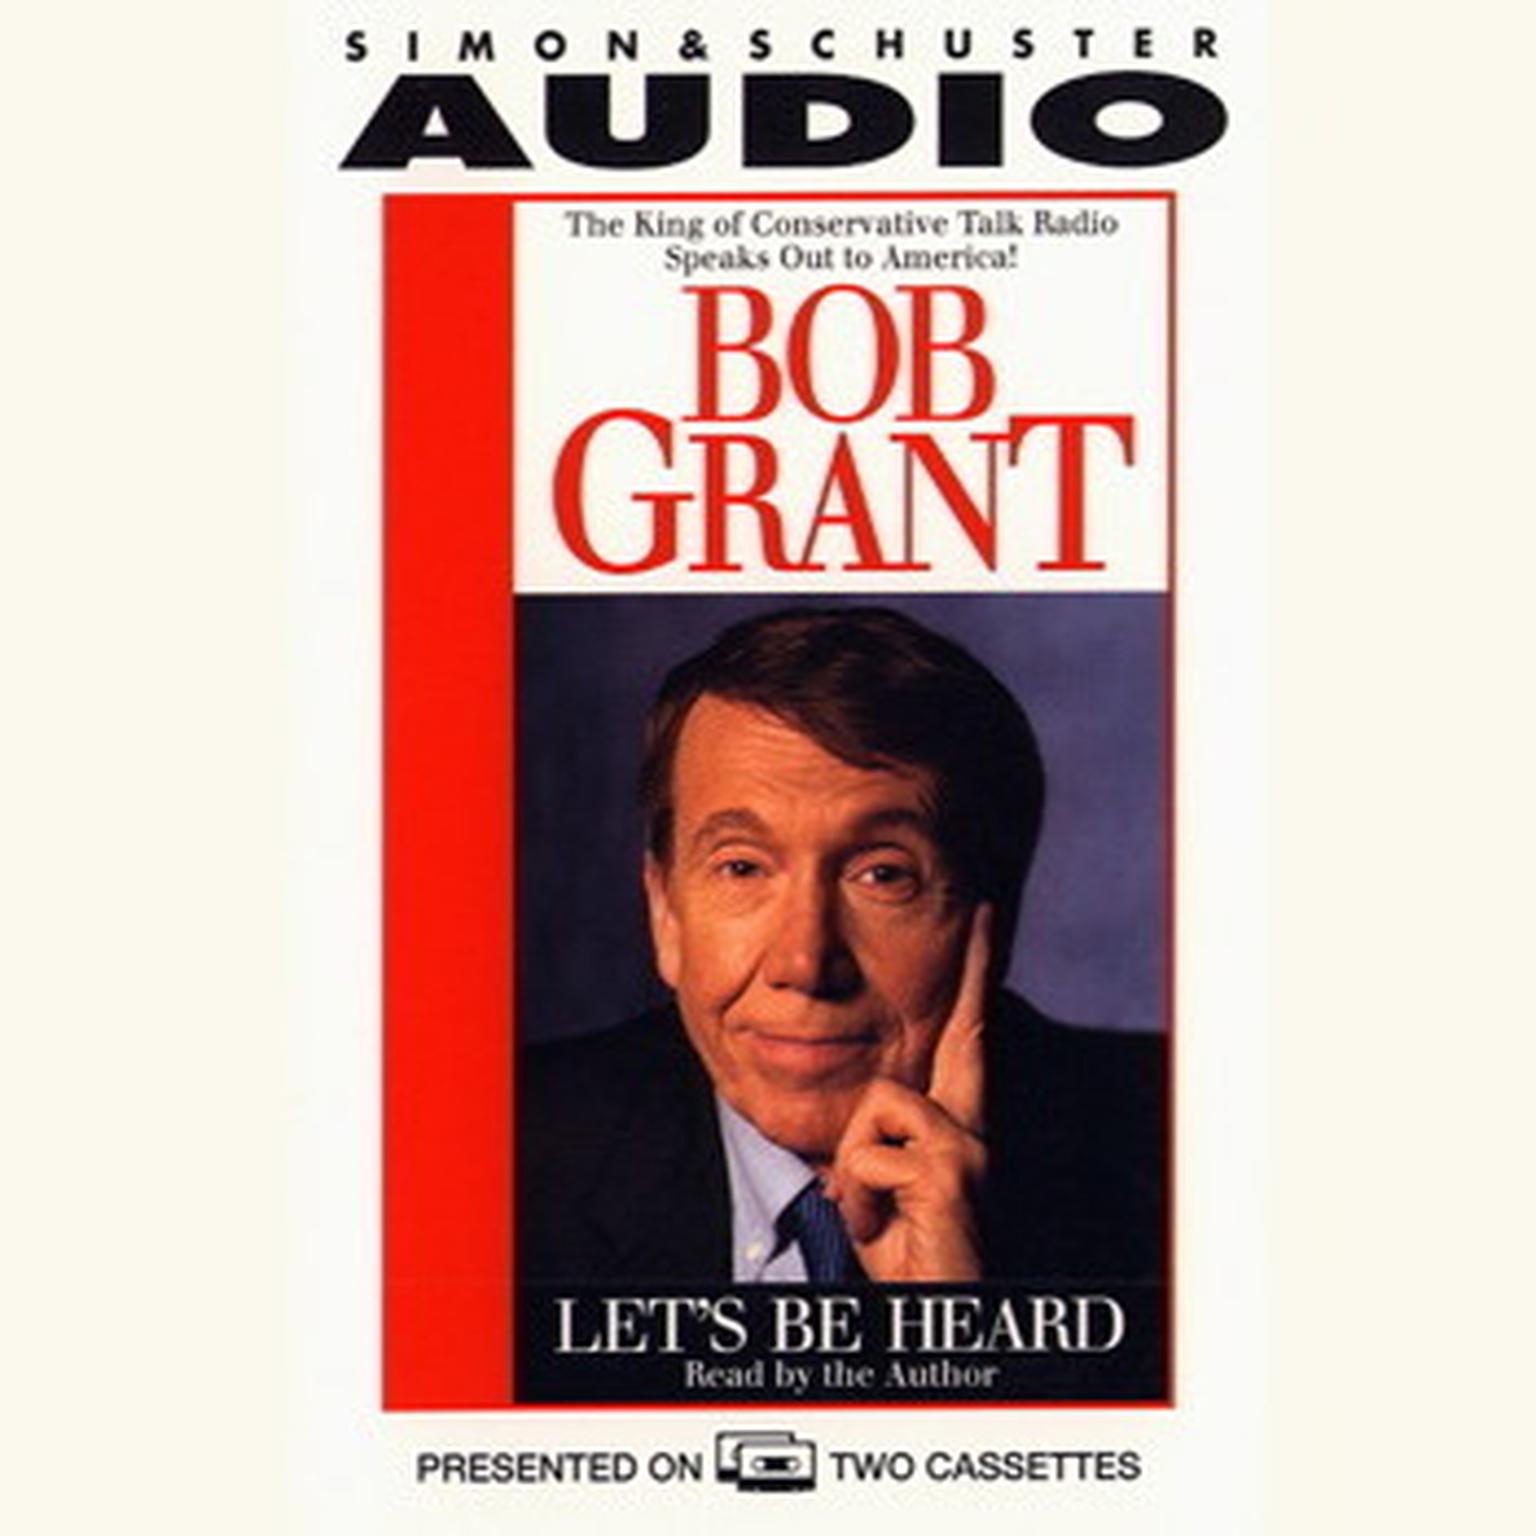 Lets Be Heard (Abridged) Audiobook, by Robert Grant